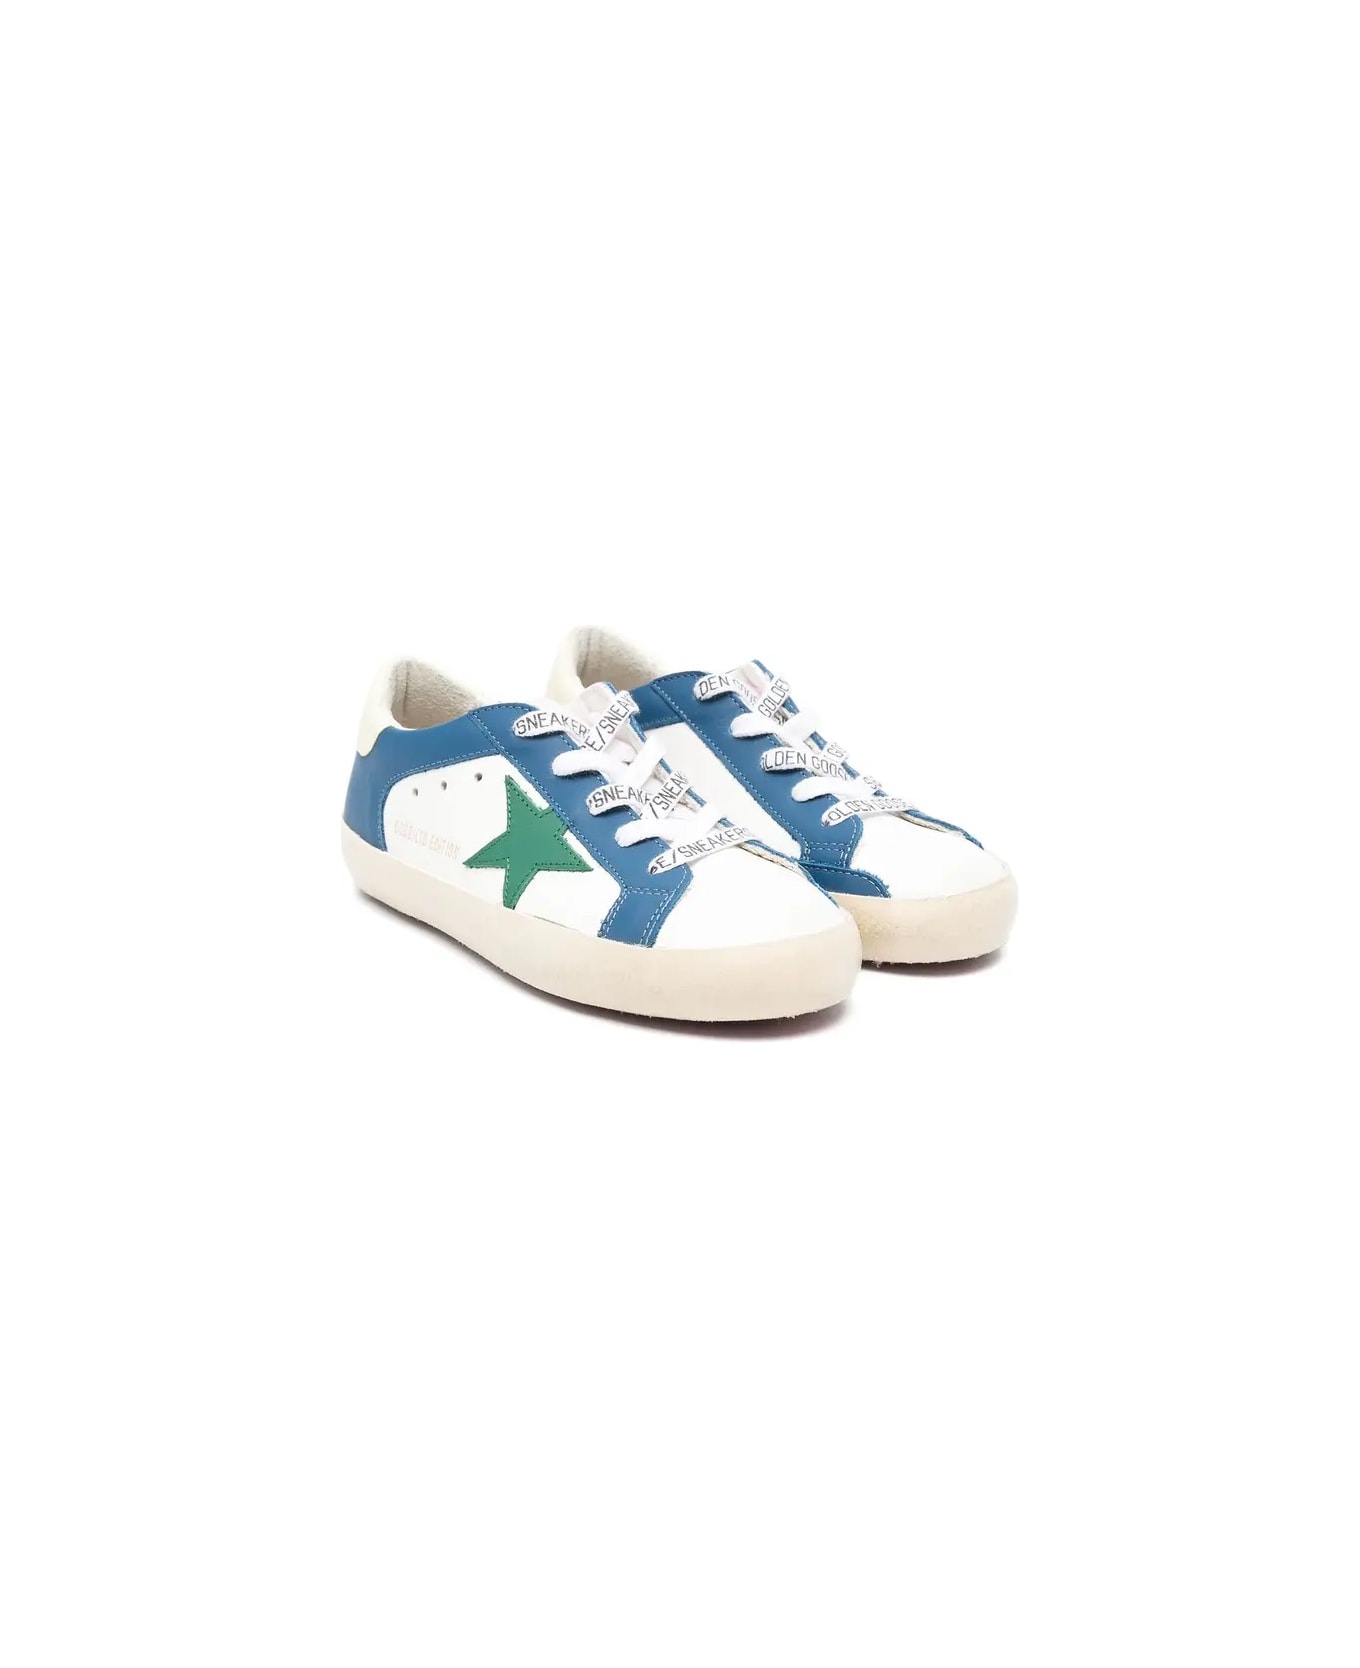 Bonpoint X Golden Goose Sneakers In Northern Blue - Blue シューズ